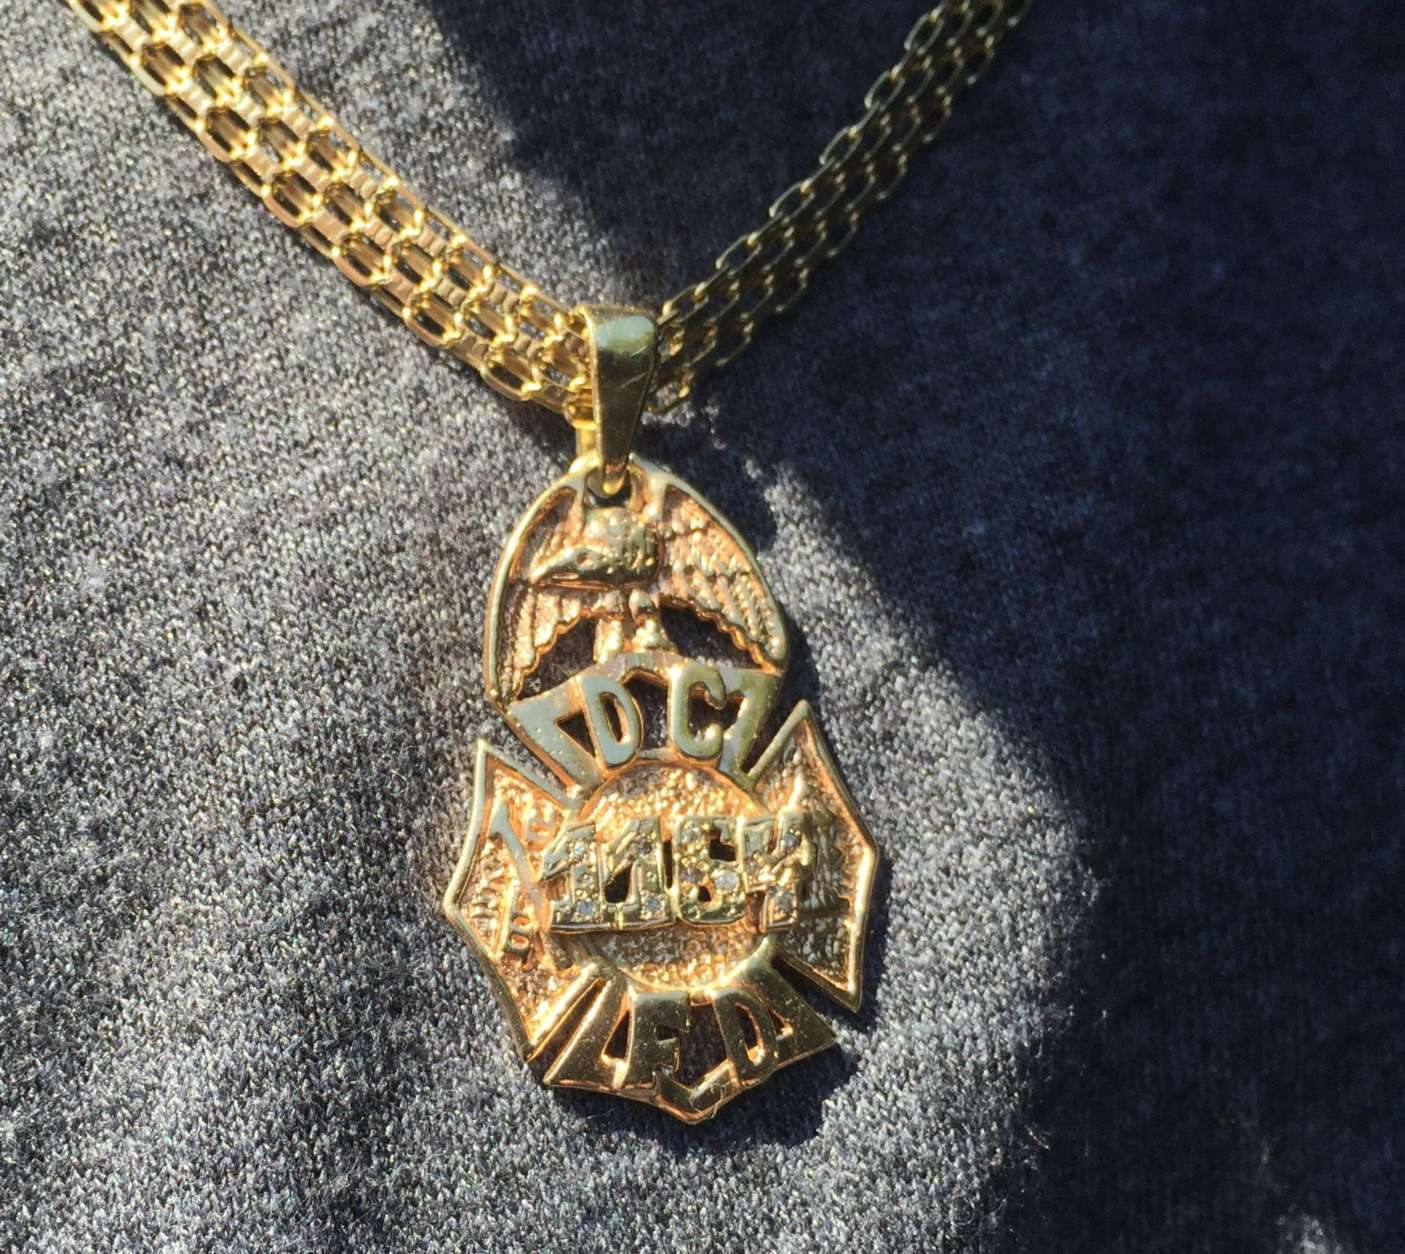 "This is like the second family," former D.C. fire chief Donald Edwards said at Wednesday’s fundraiser for Dane Smothers Jr. This pendant belongs to 21-year D.C. Fire Department veteran Adrian "Stokey" Stokes, who rode his motorcycle to the fundraiser at Tune Inn. "The motorcycle community always supports charities. We always give back," Stokes said. "But this time, it's special for us, because this time, it’s one of our own." (WTOP/Kristi King)